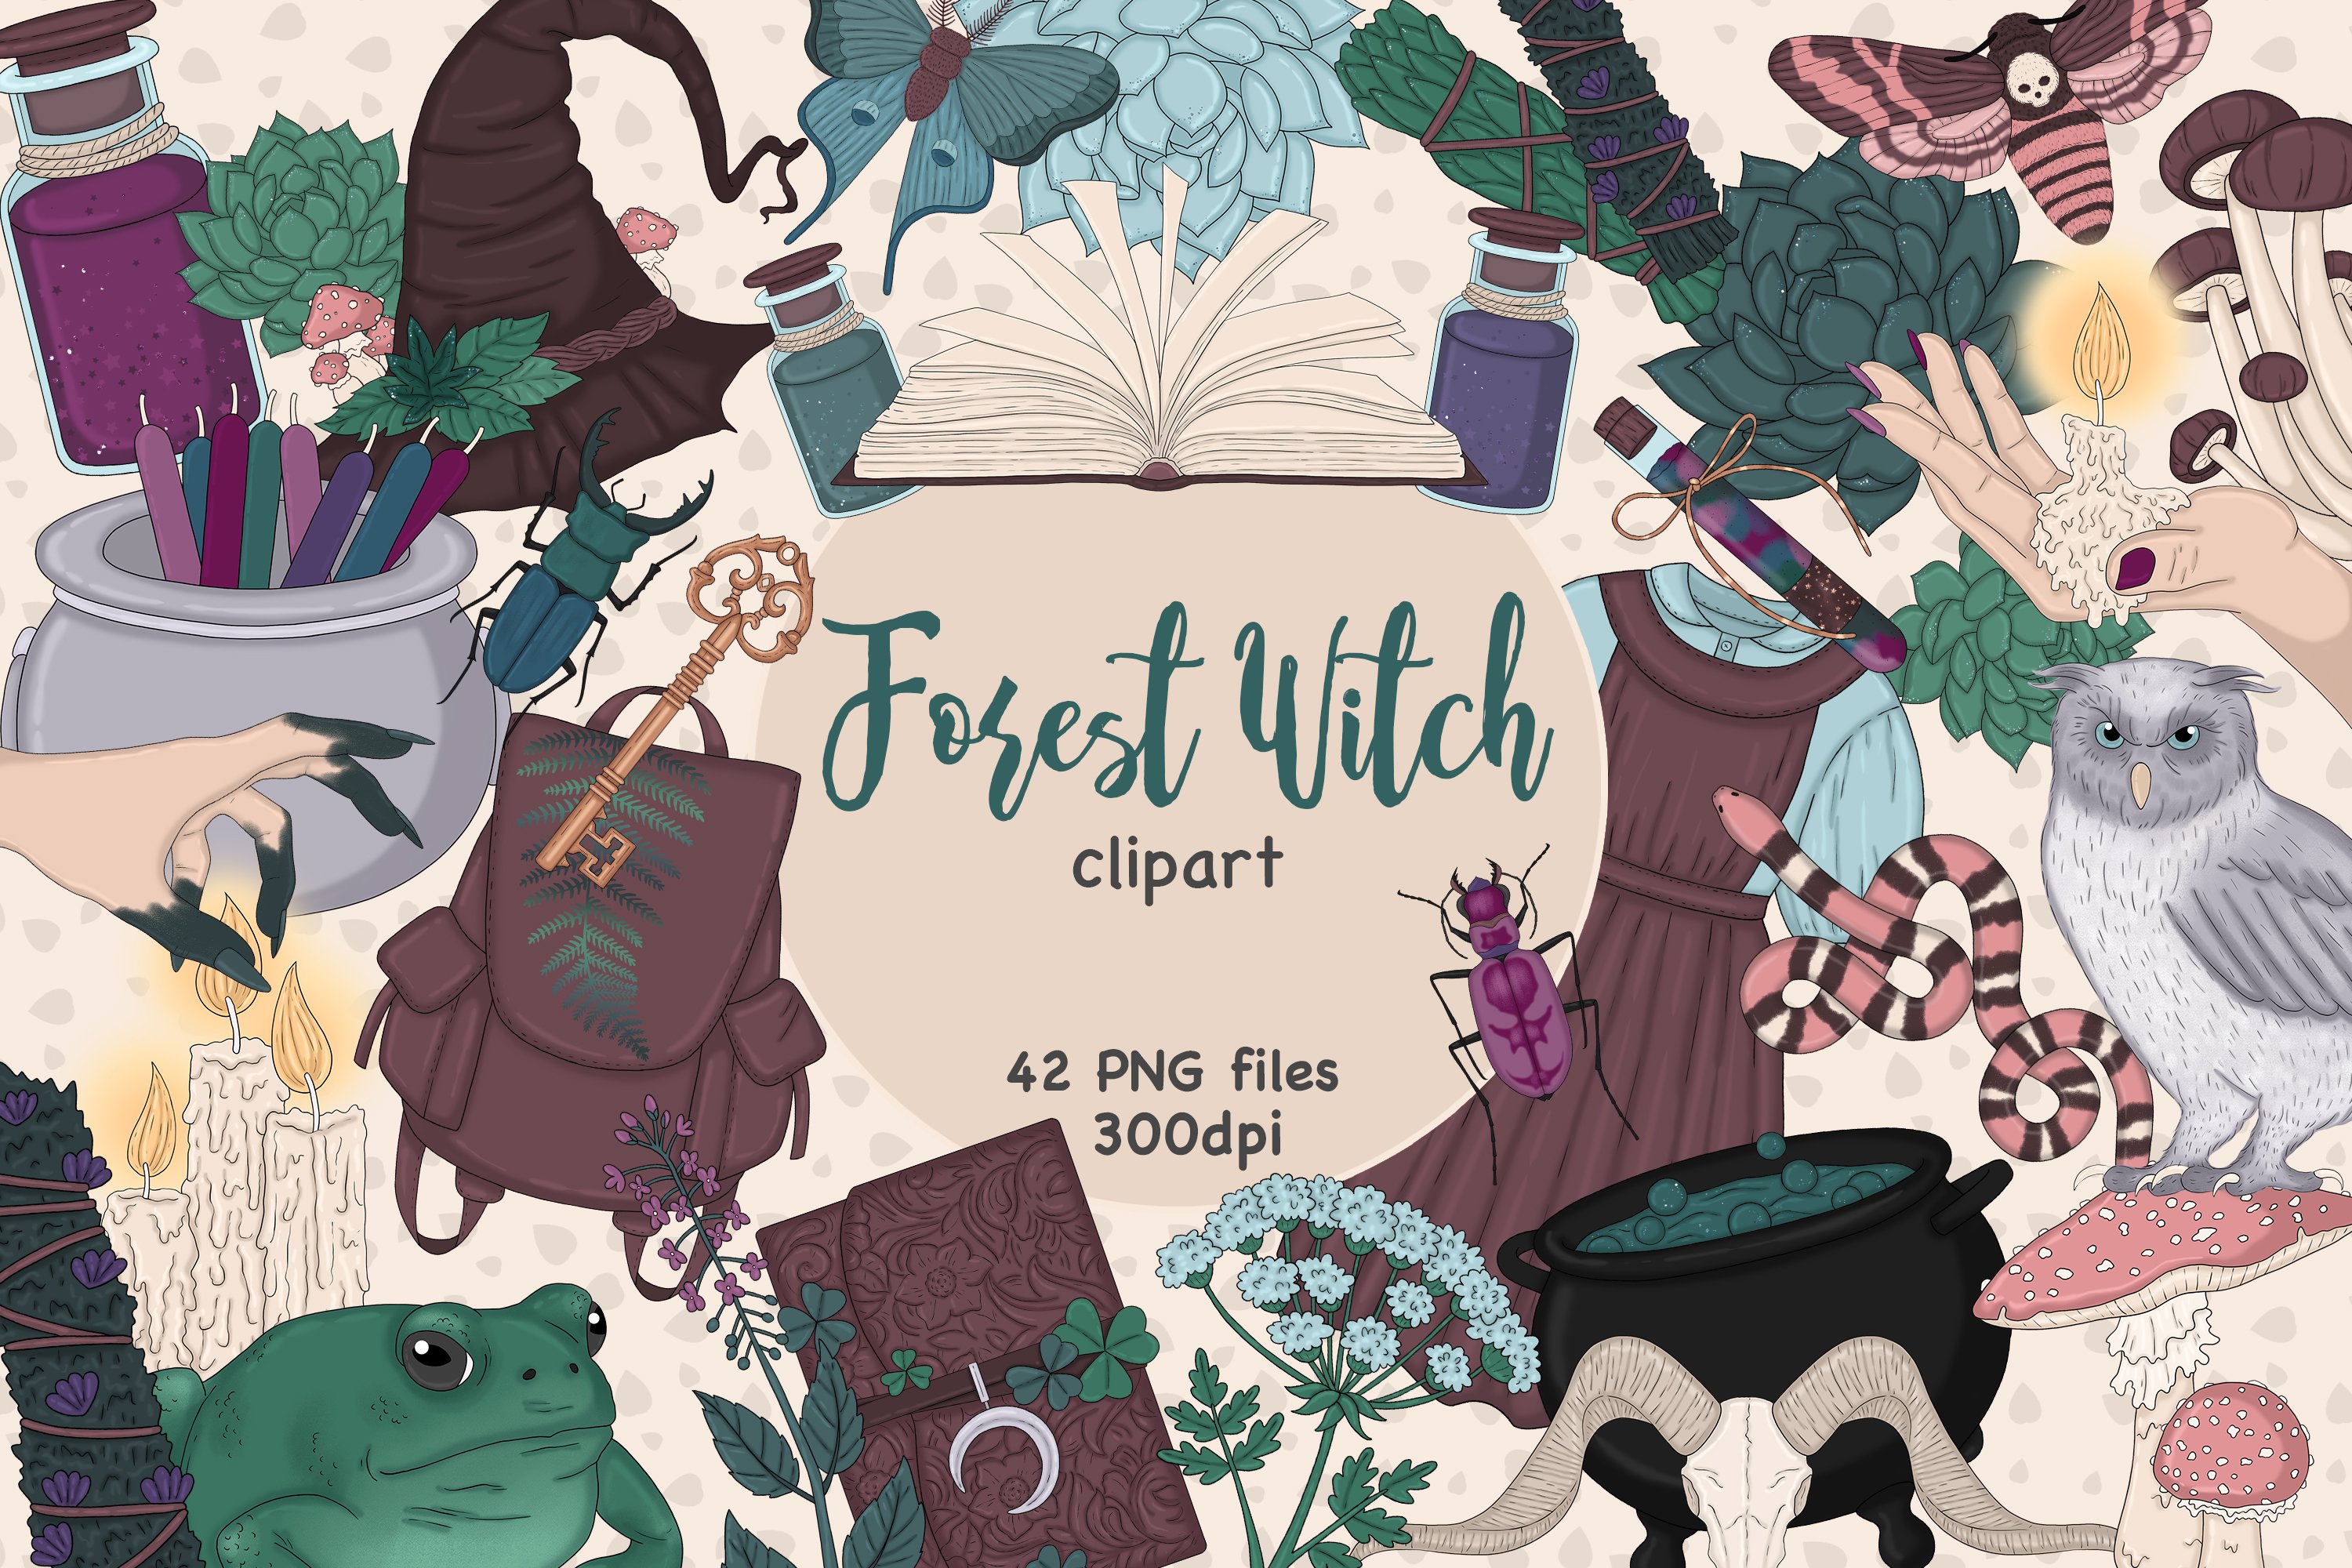 Forest Witch Clipart cover image.